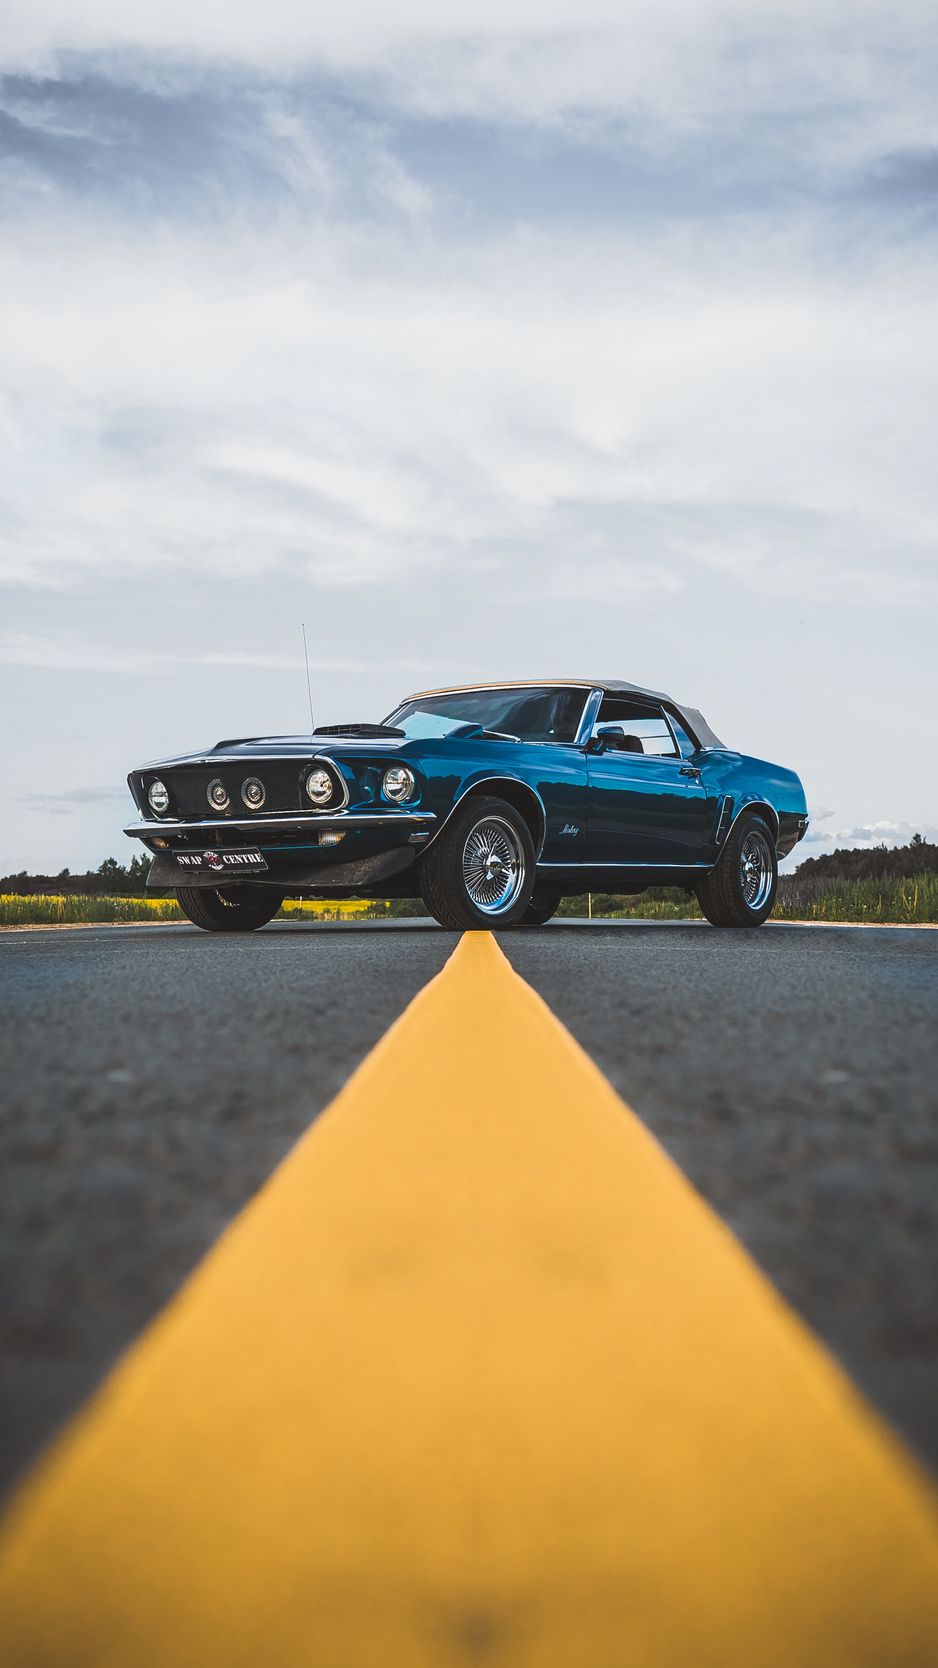 Download wallpaper 938x1668 ford mustang, car, blue, side view, road,  asphalt iphone 8/7/6s/6 for parallax hd background